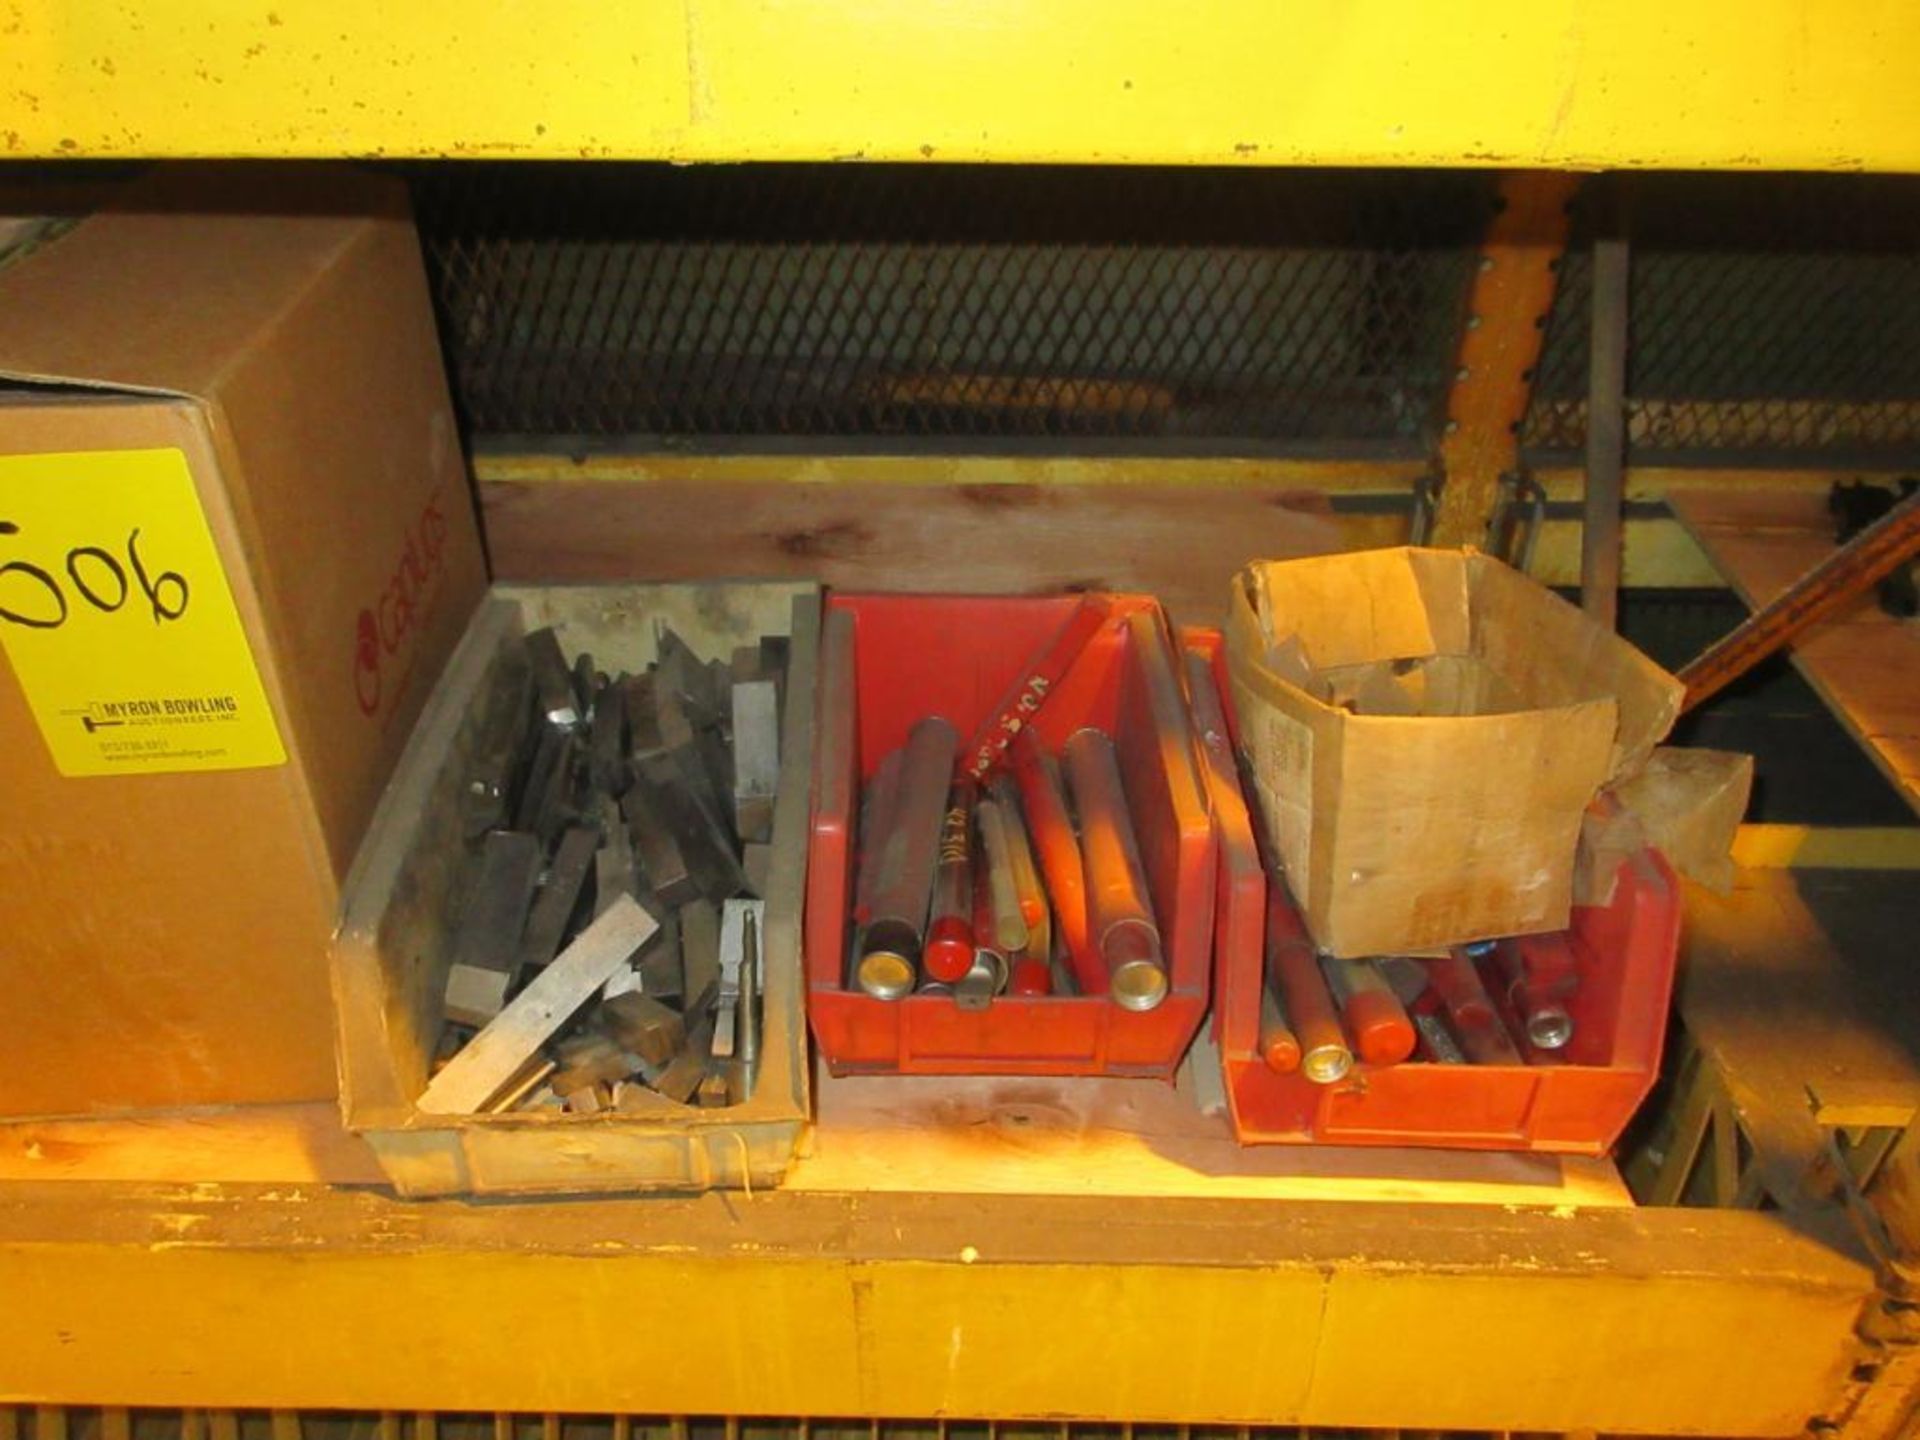 CONTENTS OF (22) SECTIONS PALLET RACK: ASSORTED ABRASIVES, SUNNEN STONES, TOOL BITS, DOVETAIL CUTTER - Image 14 of 43